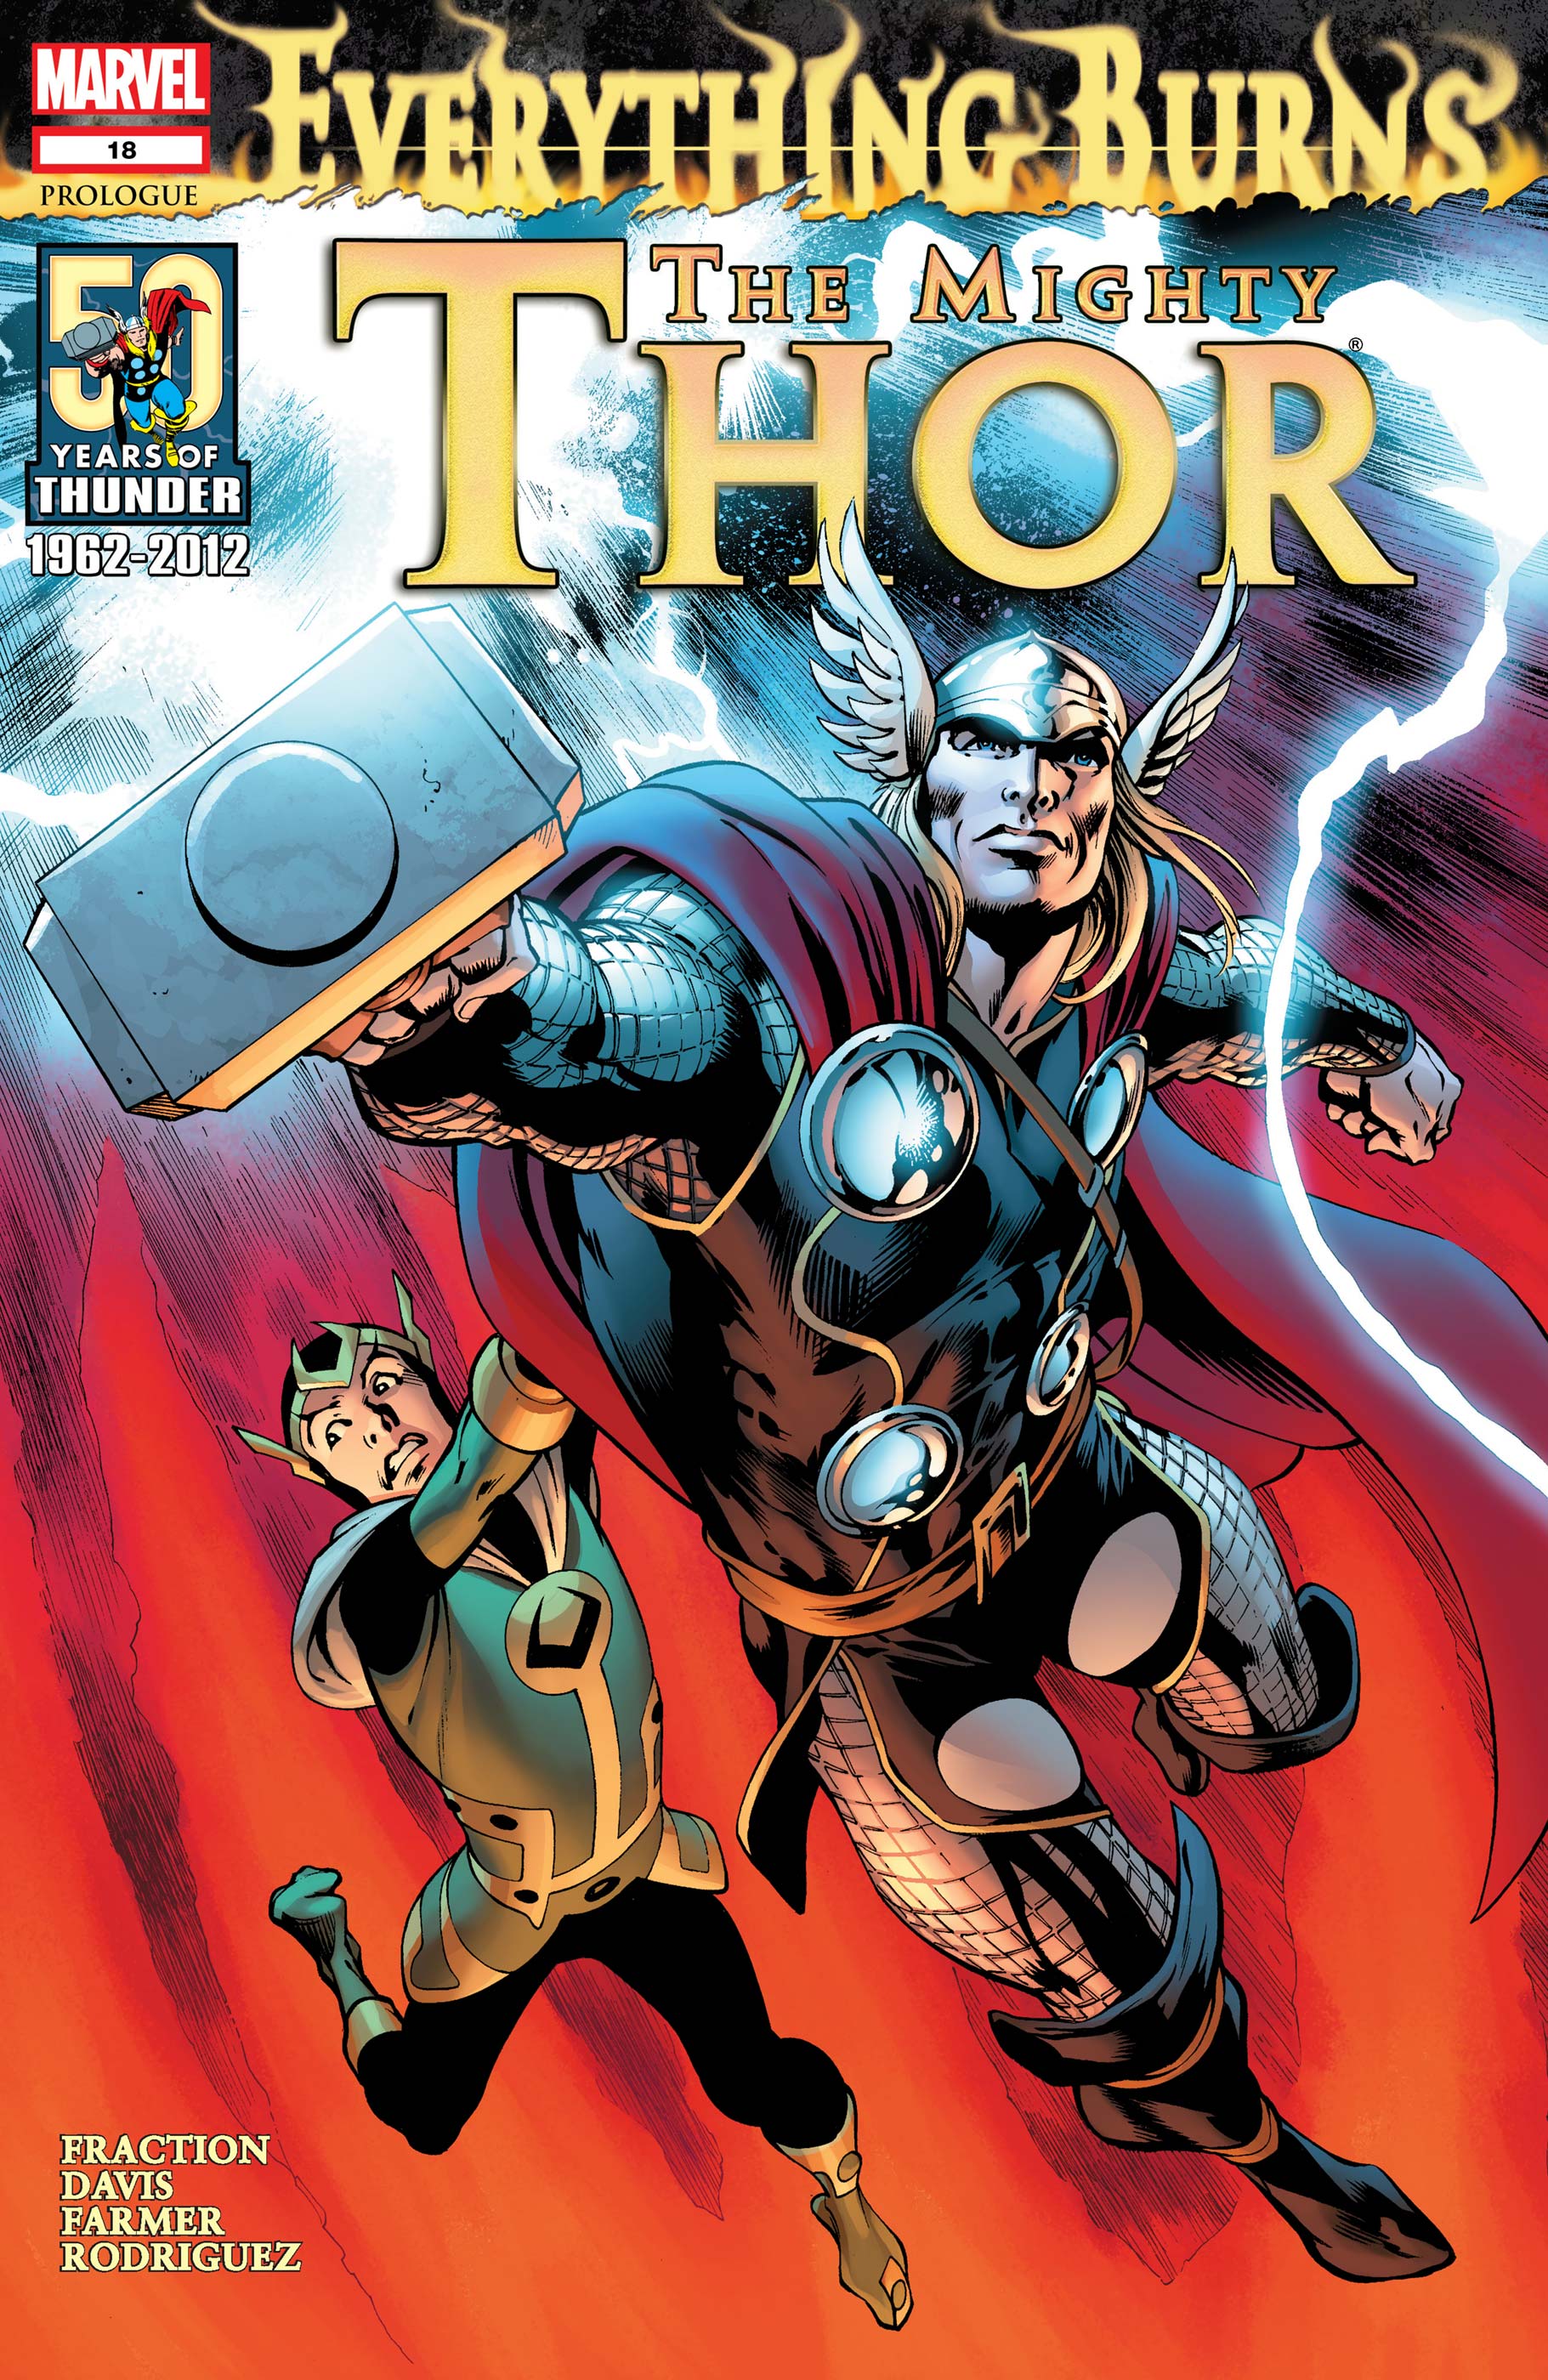 The Mighty Thor (2011) #18